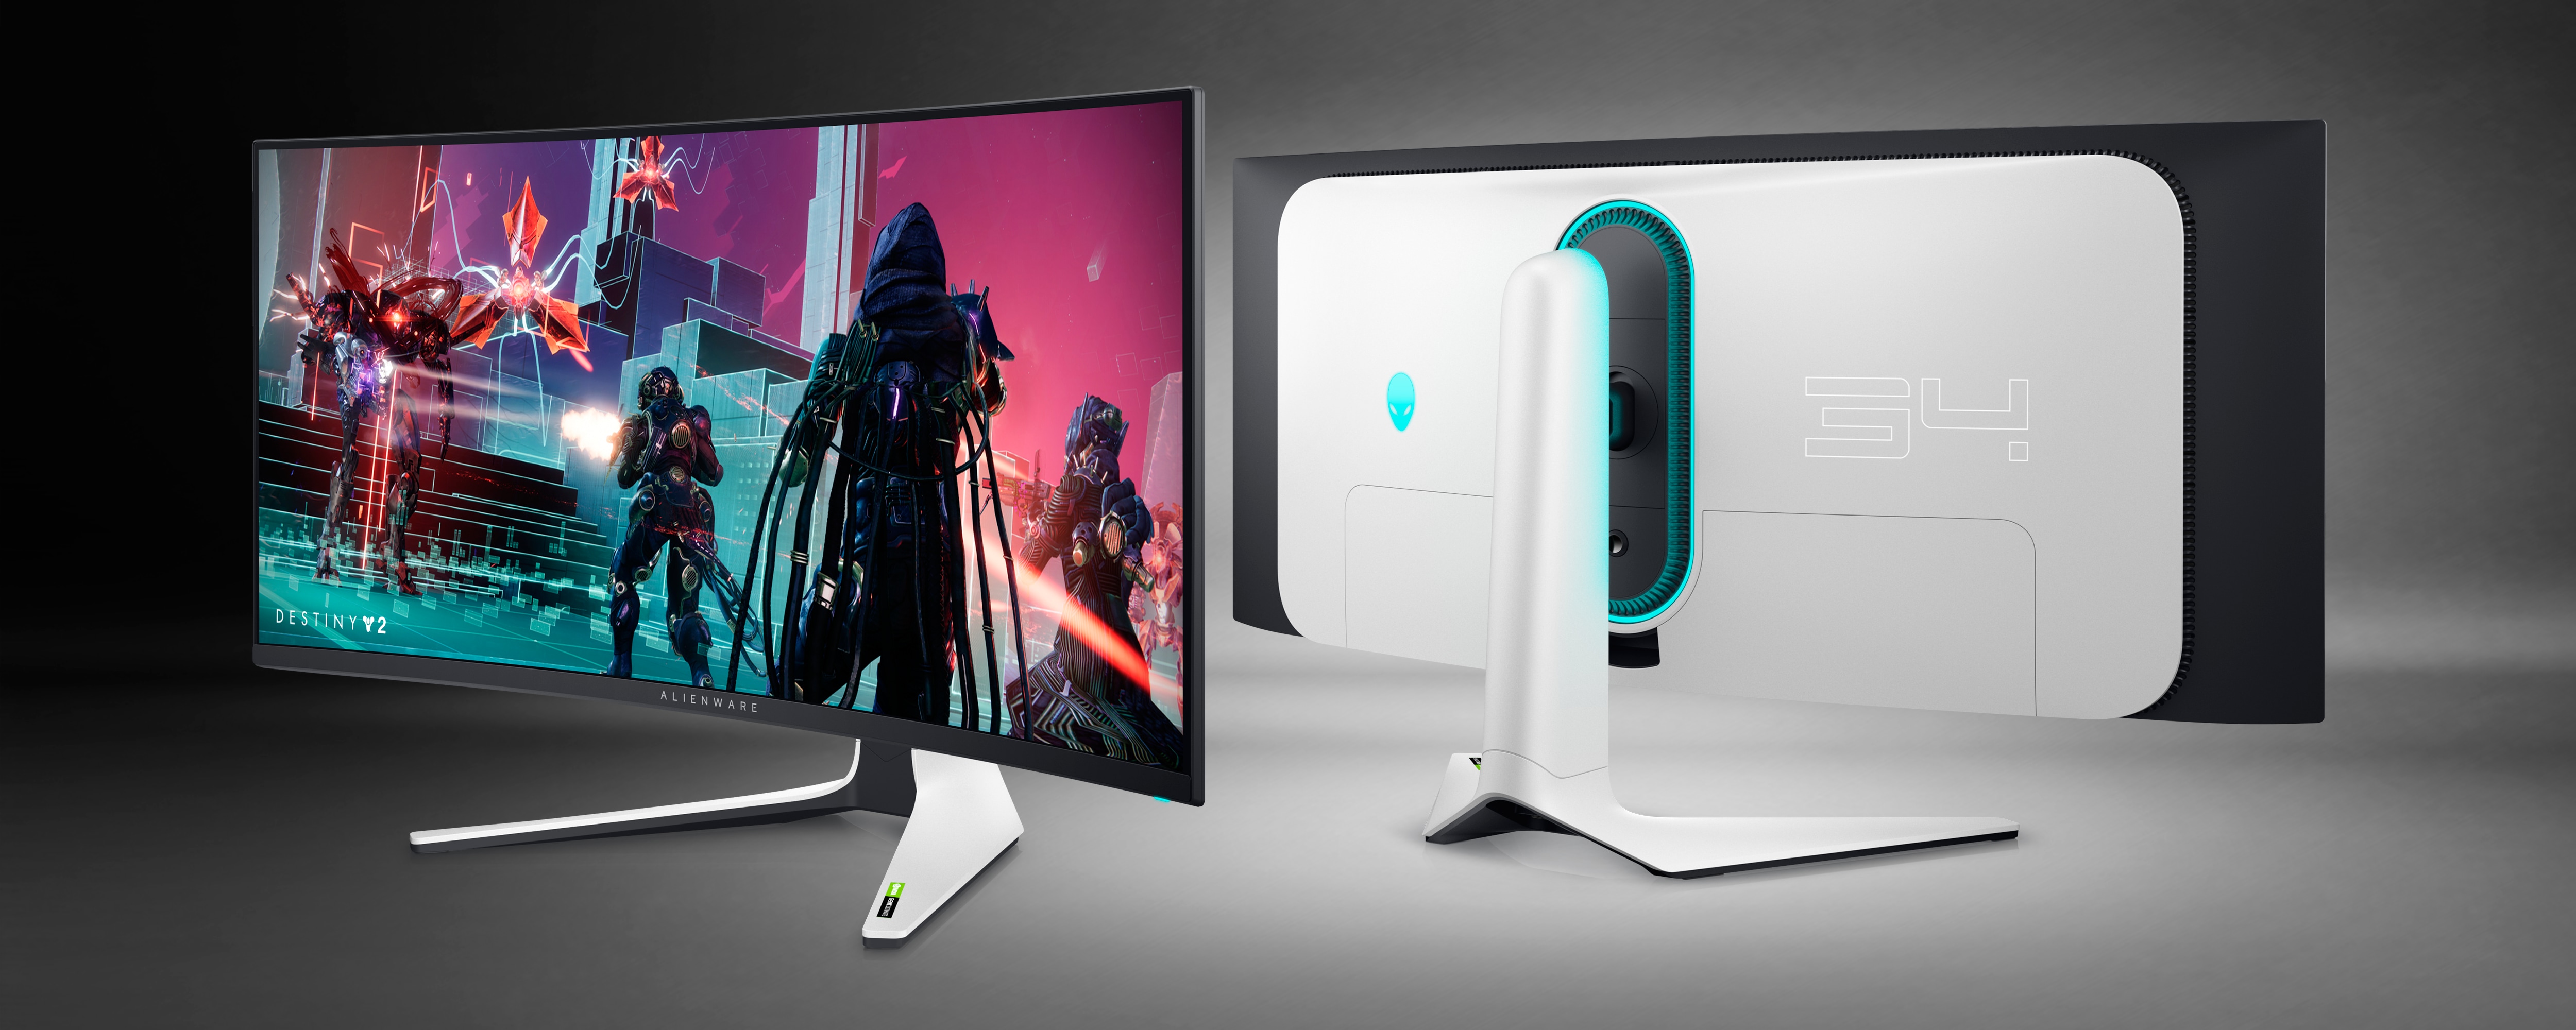 Picture of two Dell Alienware AW3423DW Monitors, the one with visible screen has a Destiny 2 game image on it.